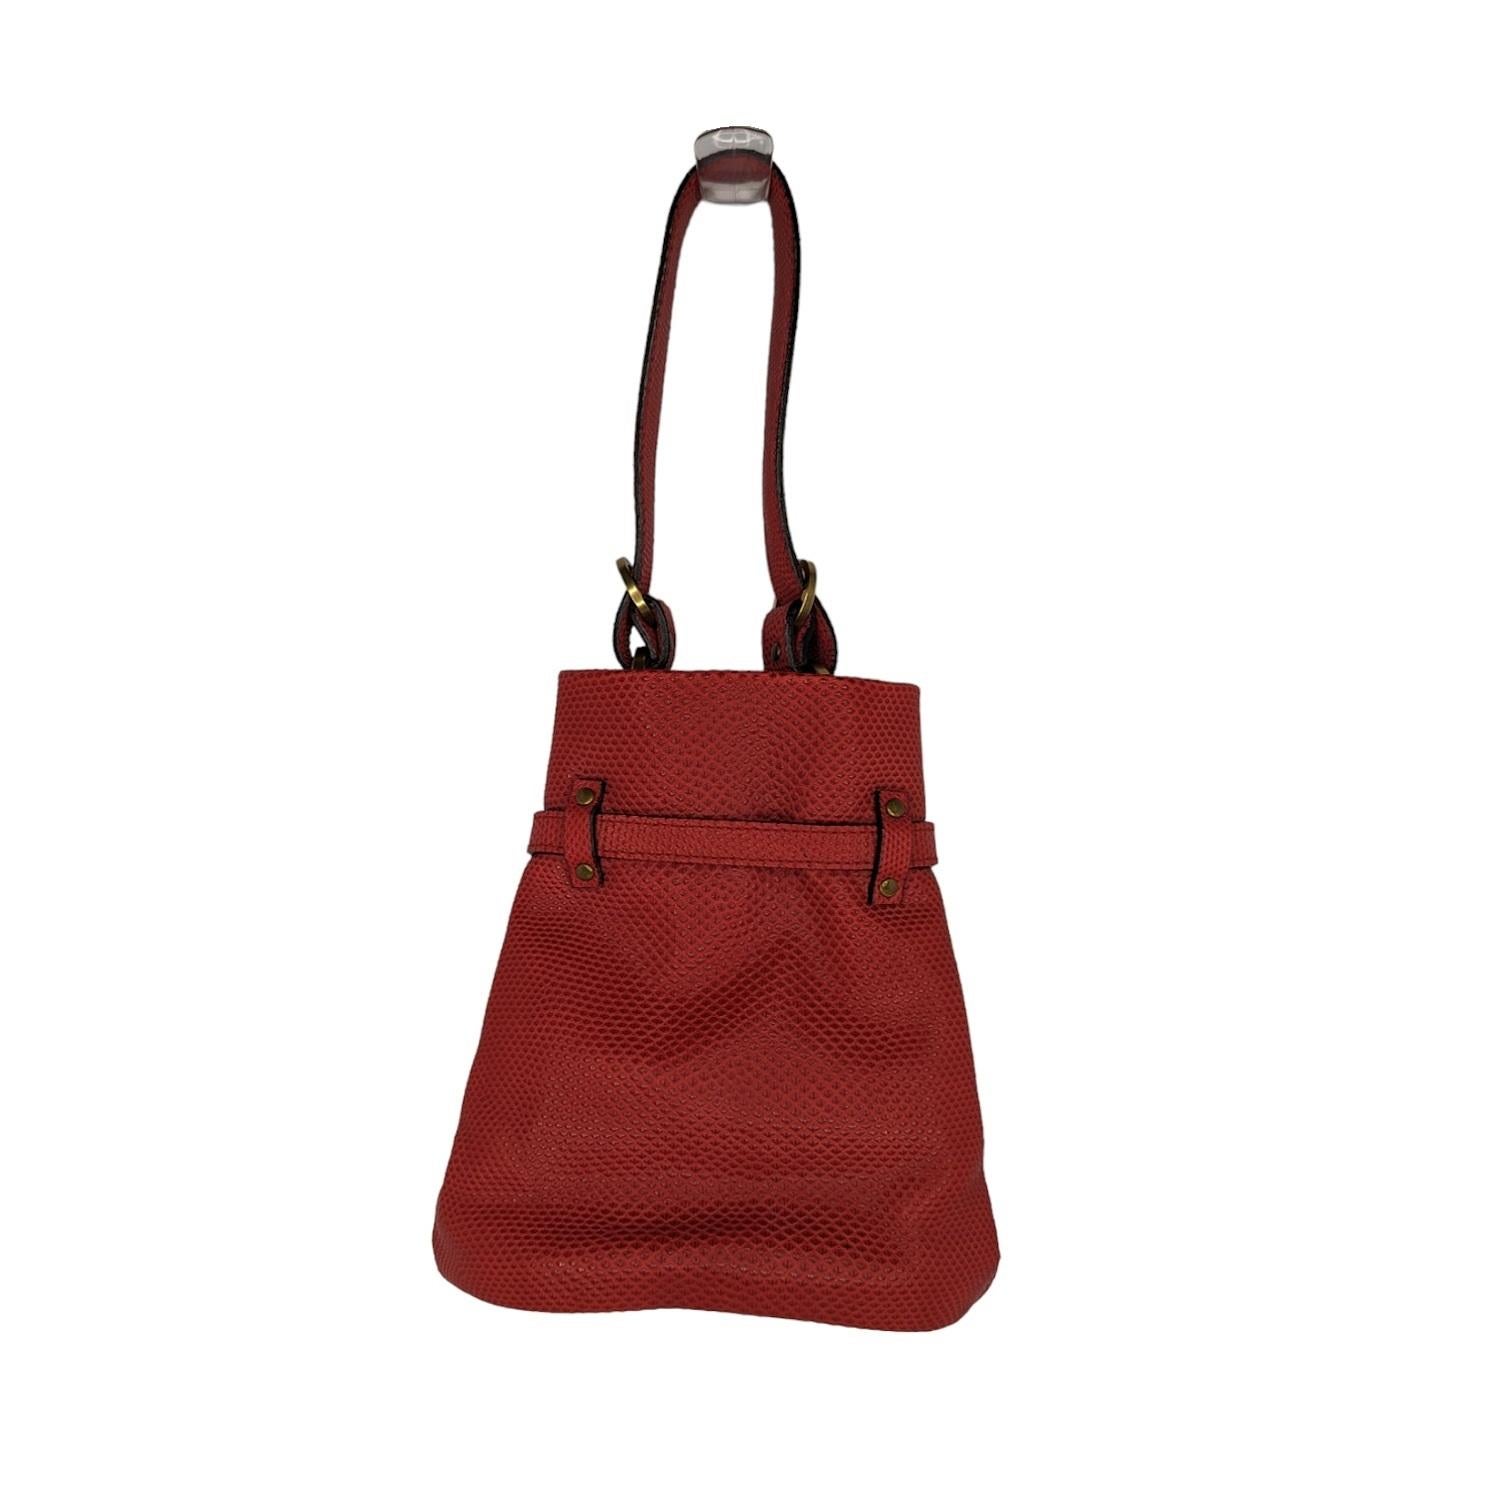 Gucci Vintage Red Karung Mini Bucket Bag In Excellent Condition For Sale In Scottsdale, AZ